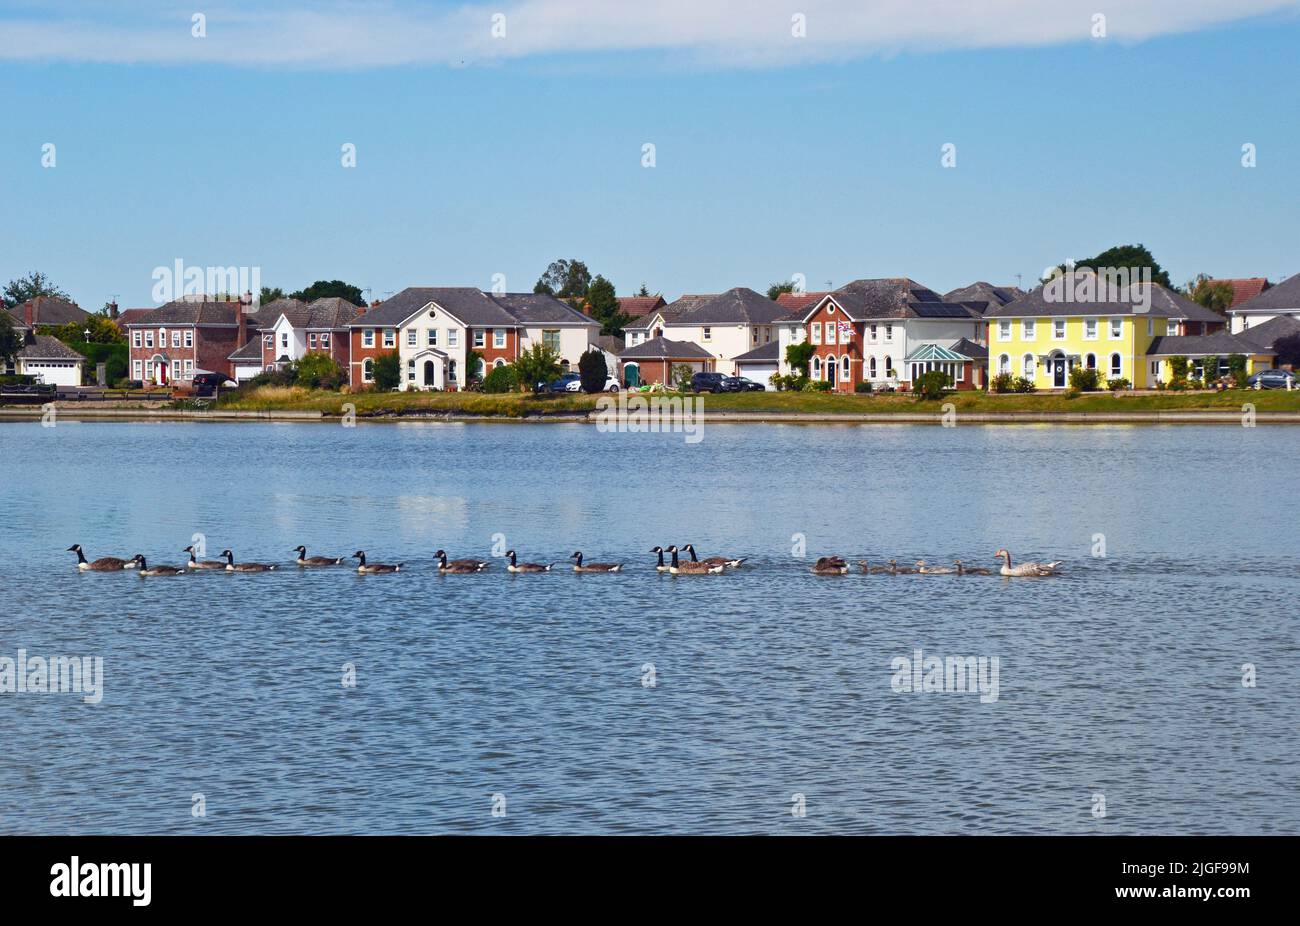 Geese swimming across the lake with their young, and houses across the lake at Watermead, Aylesbury, Buckinghamshire, UK Stock Photo